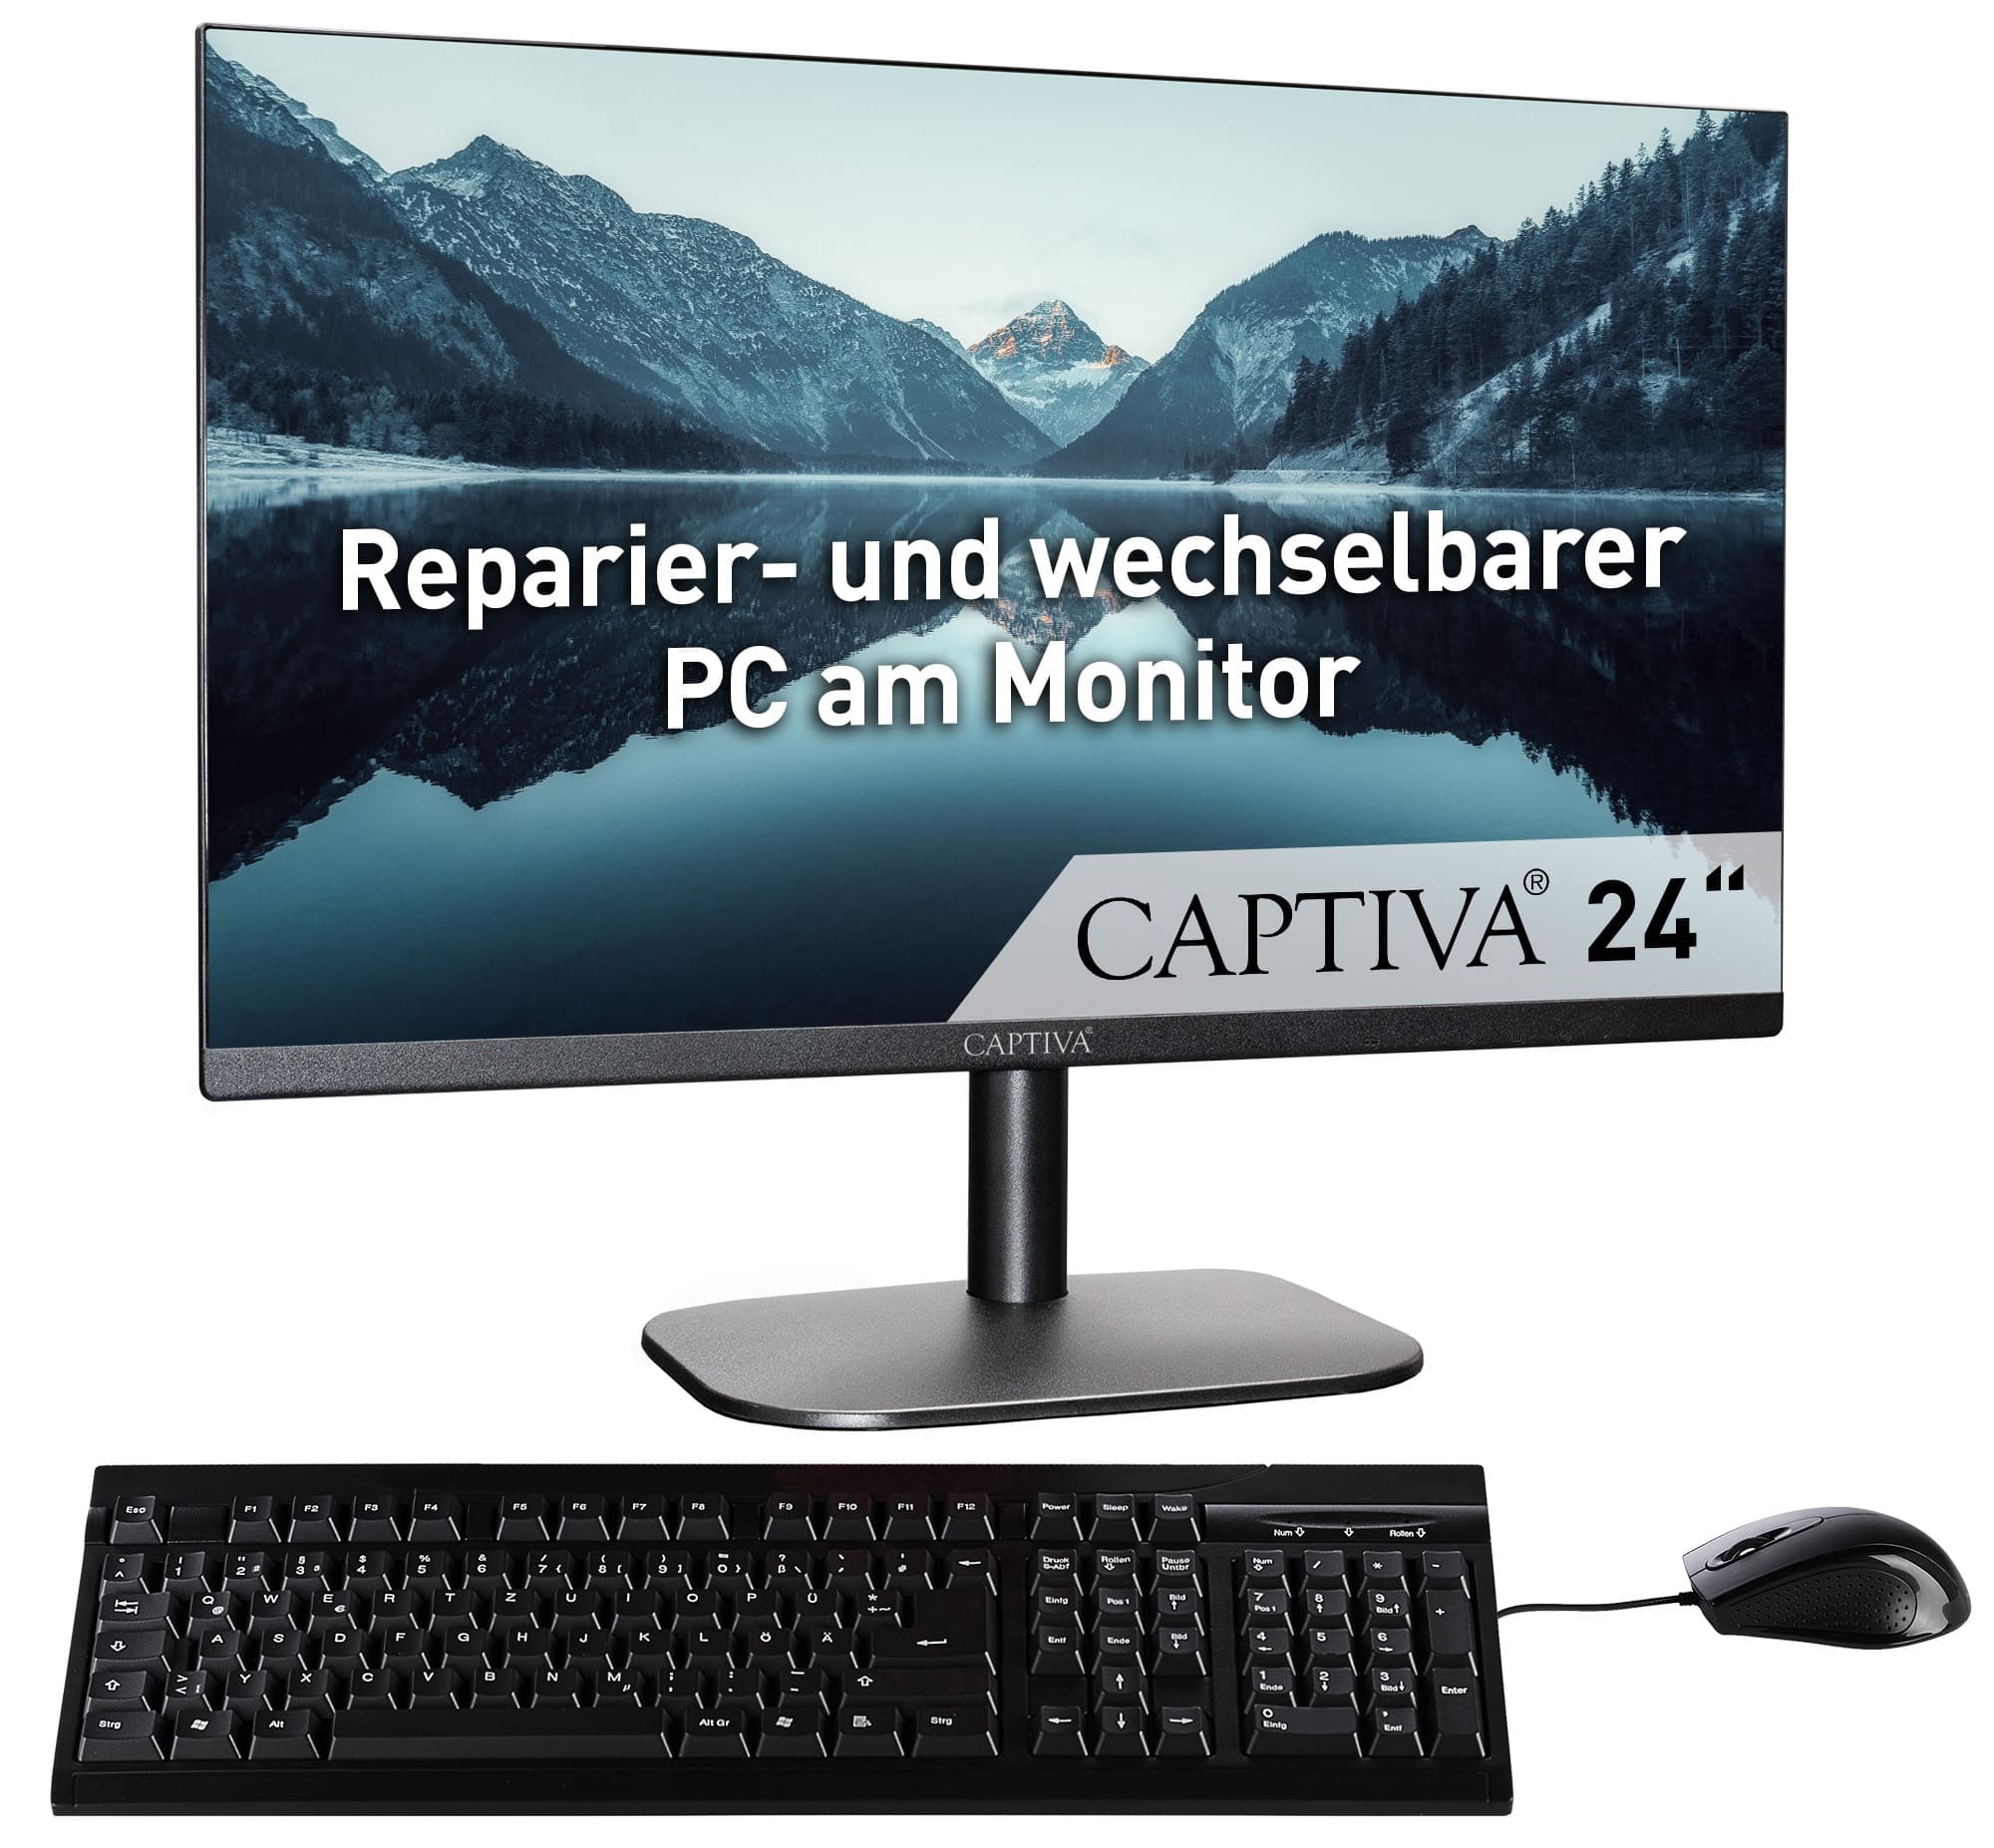 CAPTIVA All-in-One PC »All-In-One Power Starter I82-215«